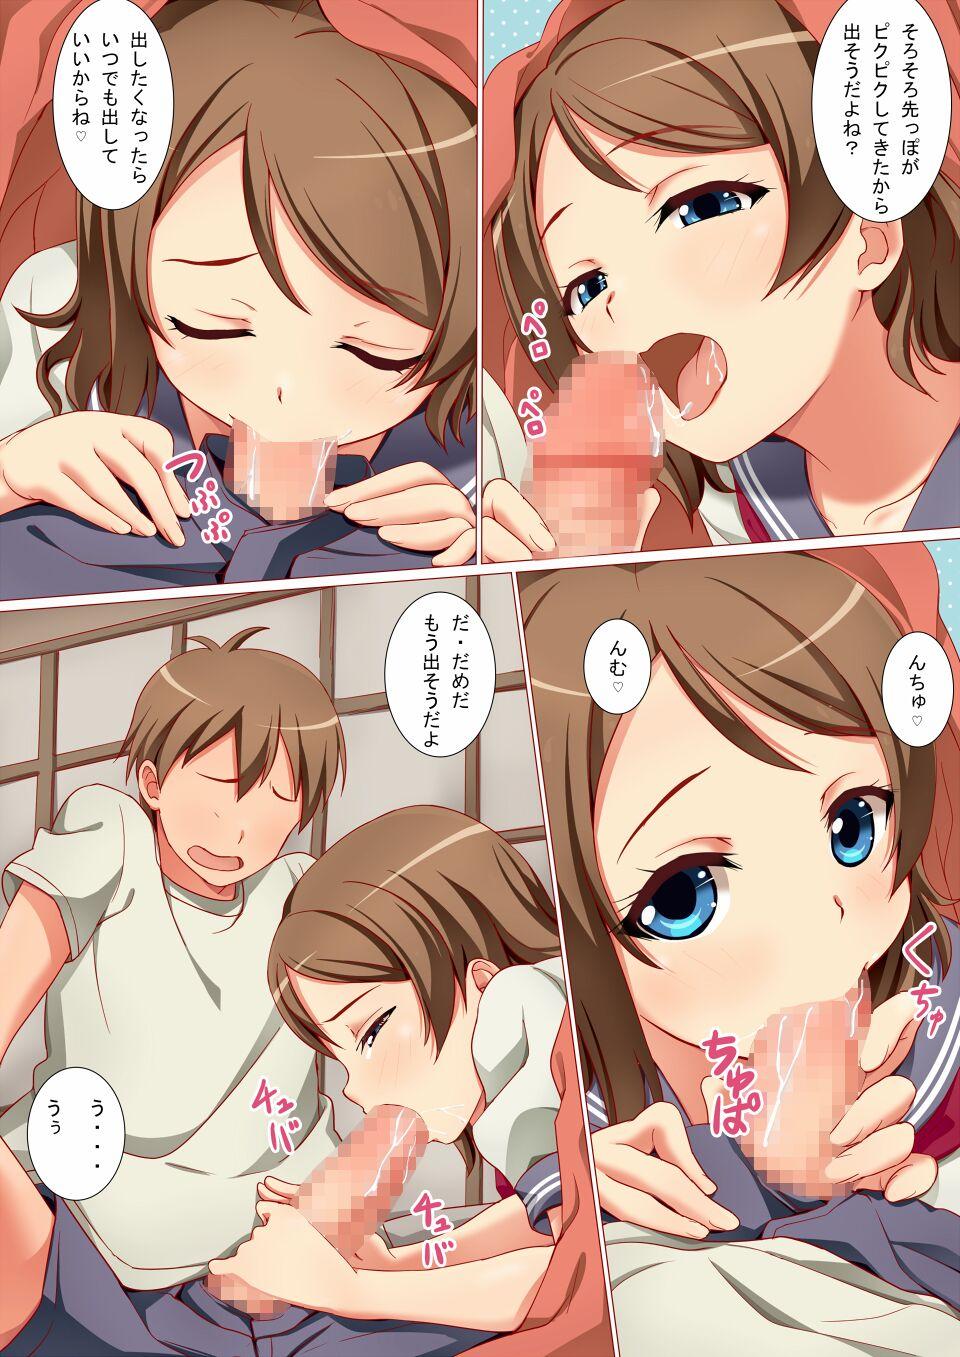 Black Morning flirting between two people - Love live sunshine Wet Cunts - Page 4